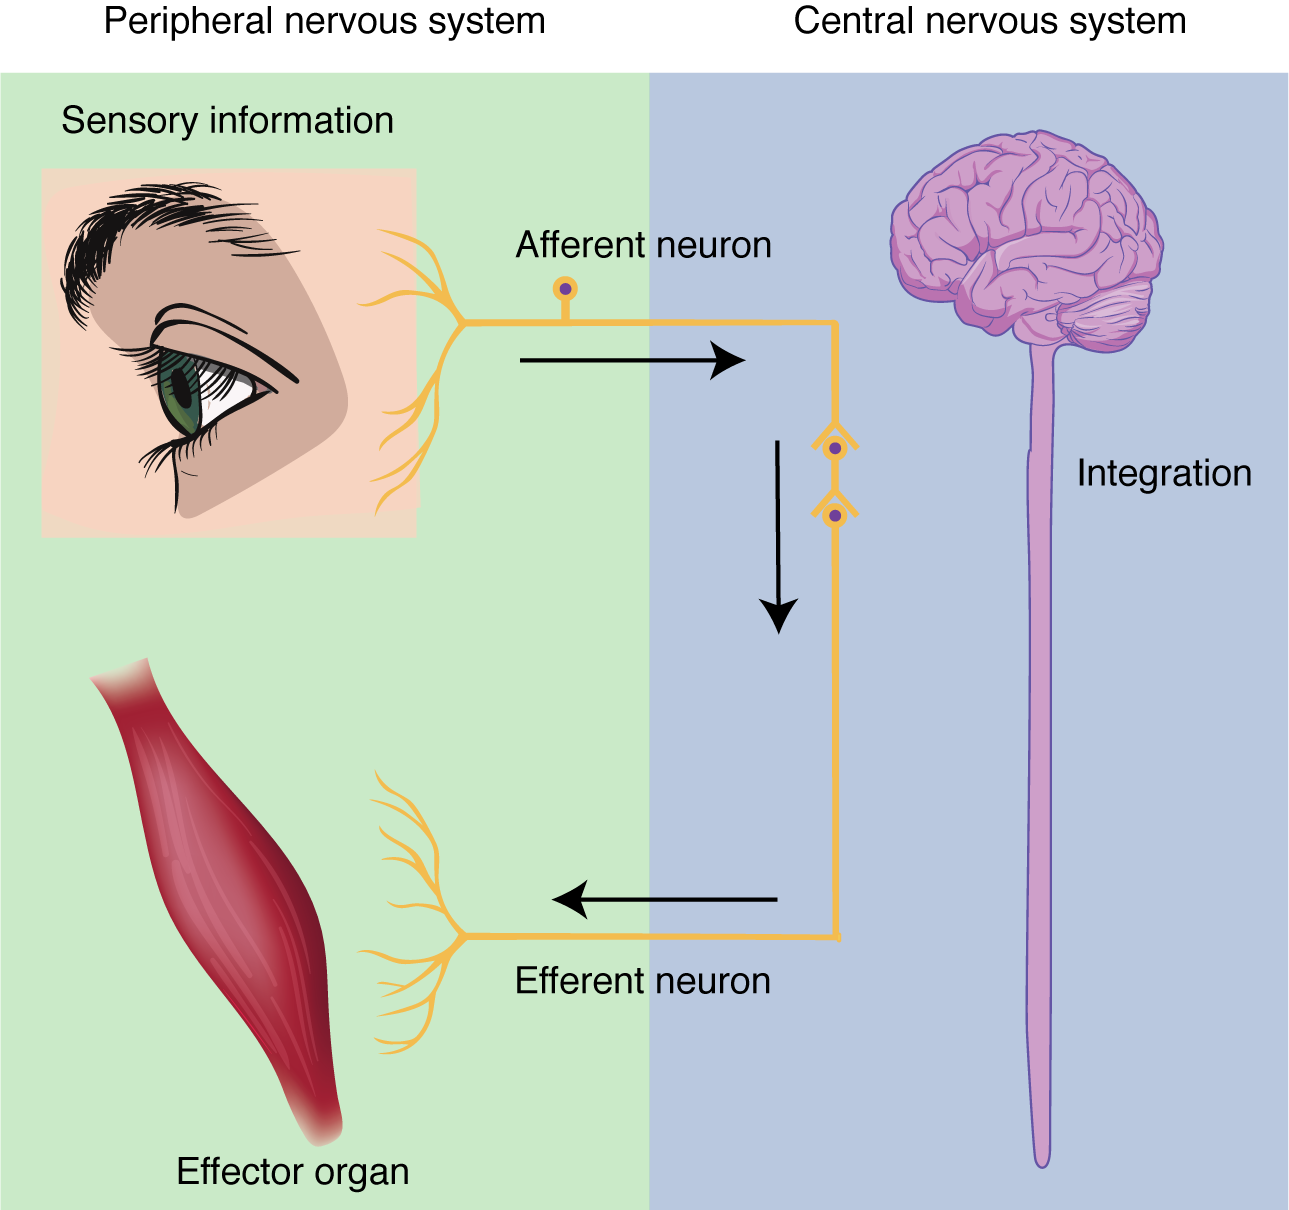 This figure shows the relationship between the peripheral and central nervous system